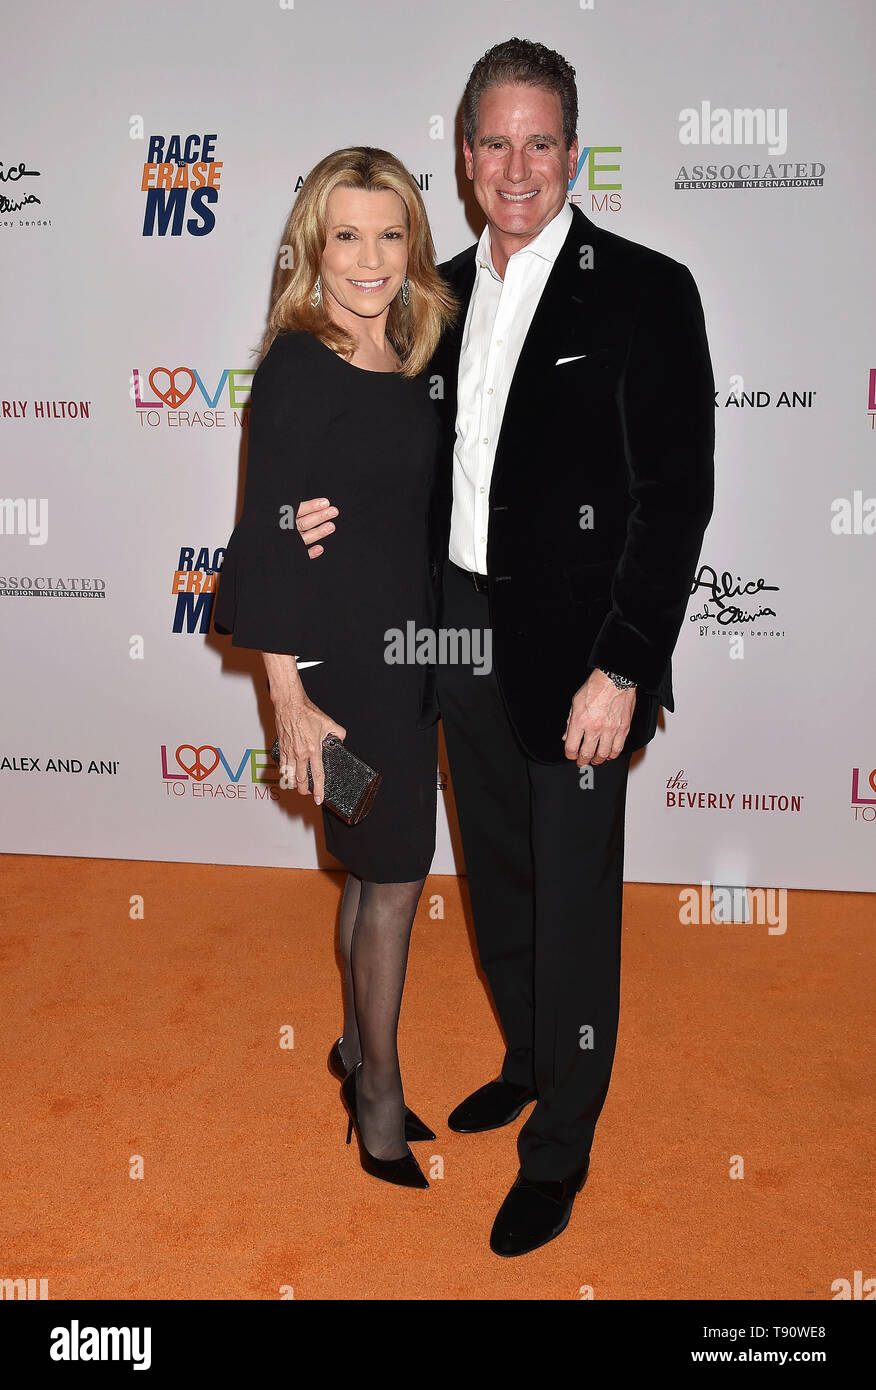 BEVERLY HILLS, CA - MAY 10: Vanna White (L) and John Donaldson attend the 26th Annual Race to Erase MS Gala at The Beverly Hilton Hotel on May 10, 2019 in Beverly Hills, California. Stock Photo